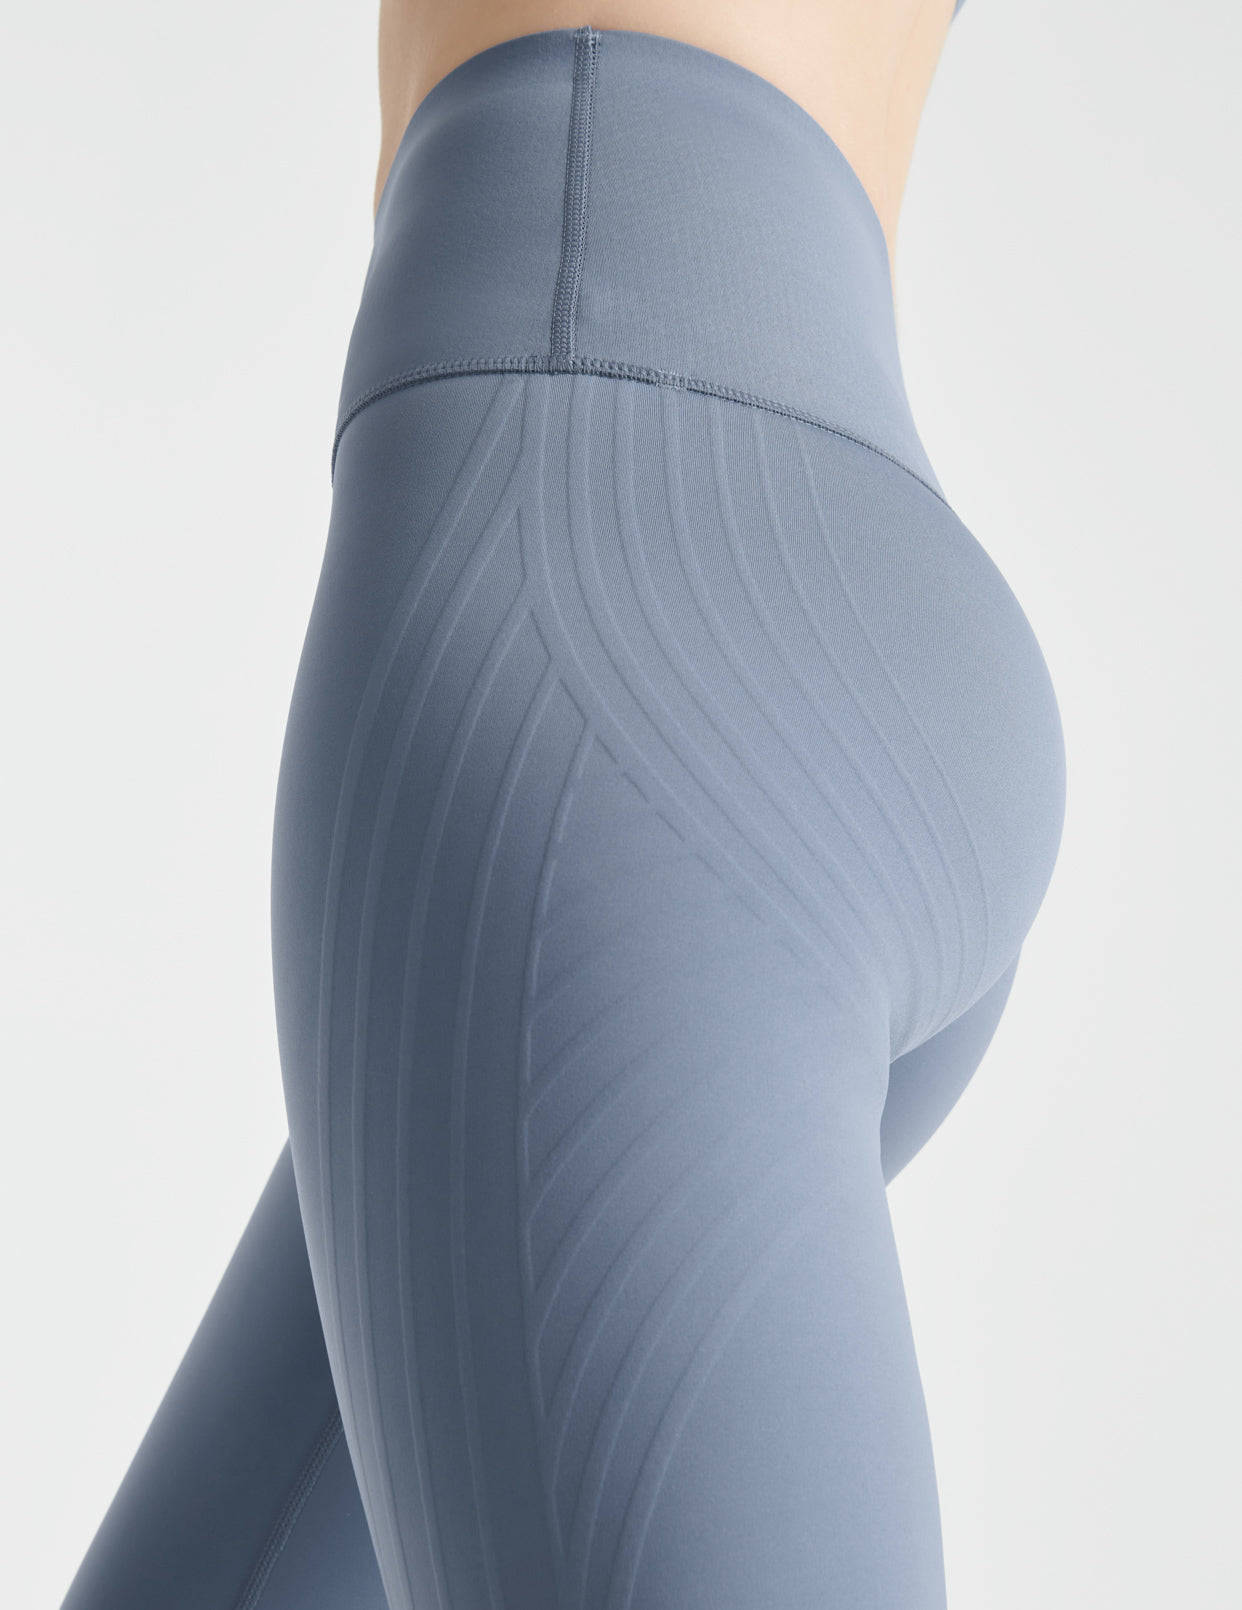 Knix - Coming August 5th  Go with the Flow™️ High Rise Leakproof Legging💧  As part of our new Knix Active Collection, we're introducing HiTouch™️3D  fabric technology leggings — our latest innovation